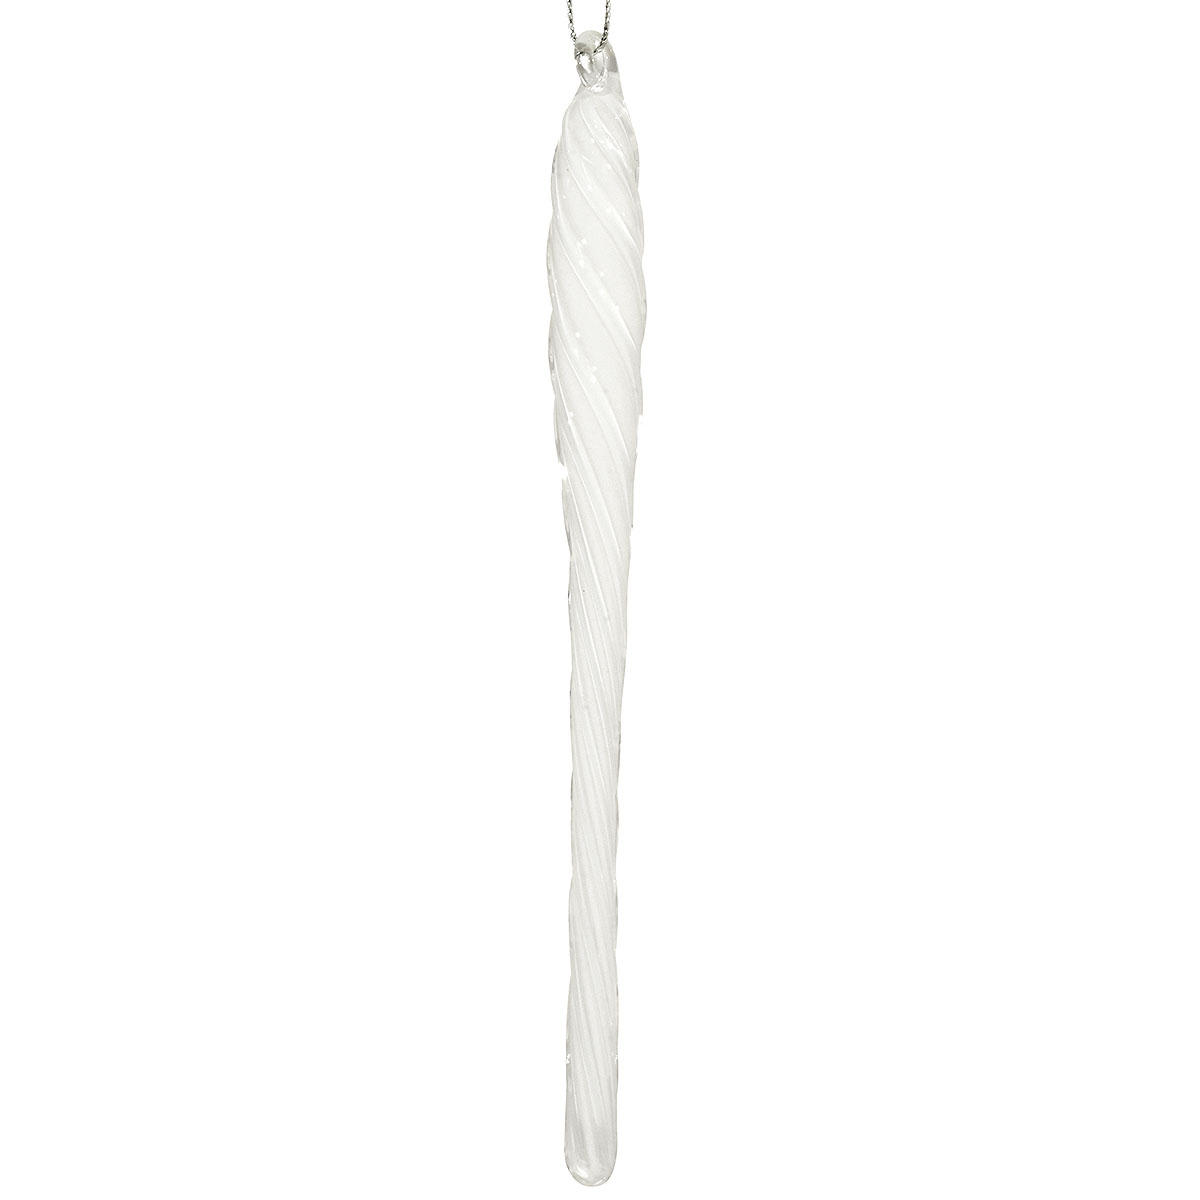 Frosty Twist Icicle Glass Ornament